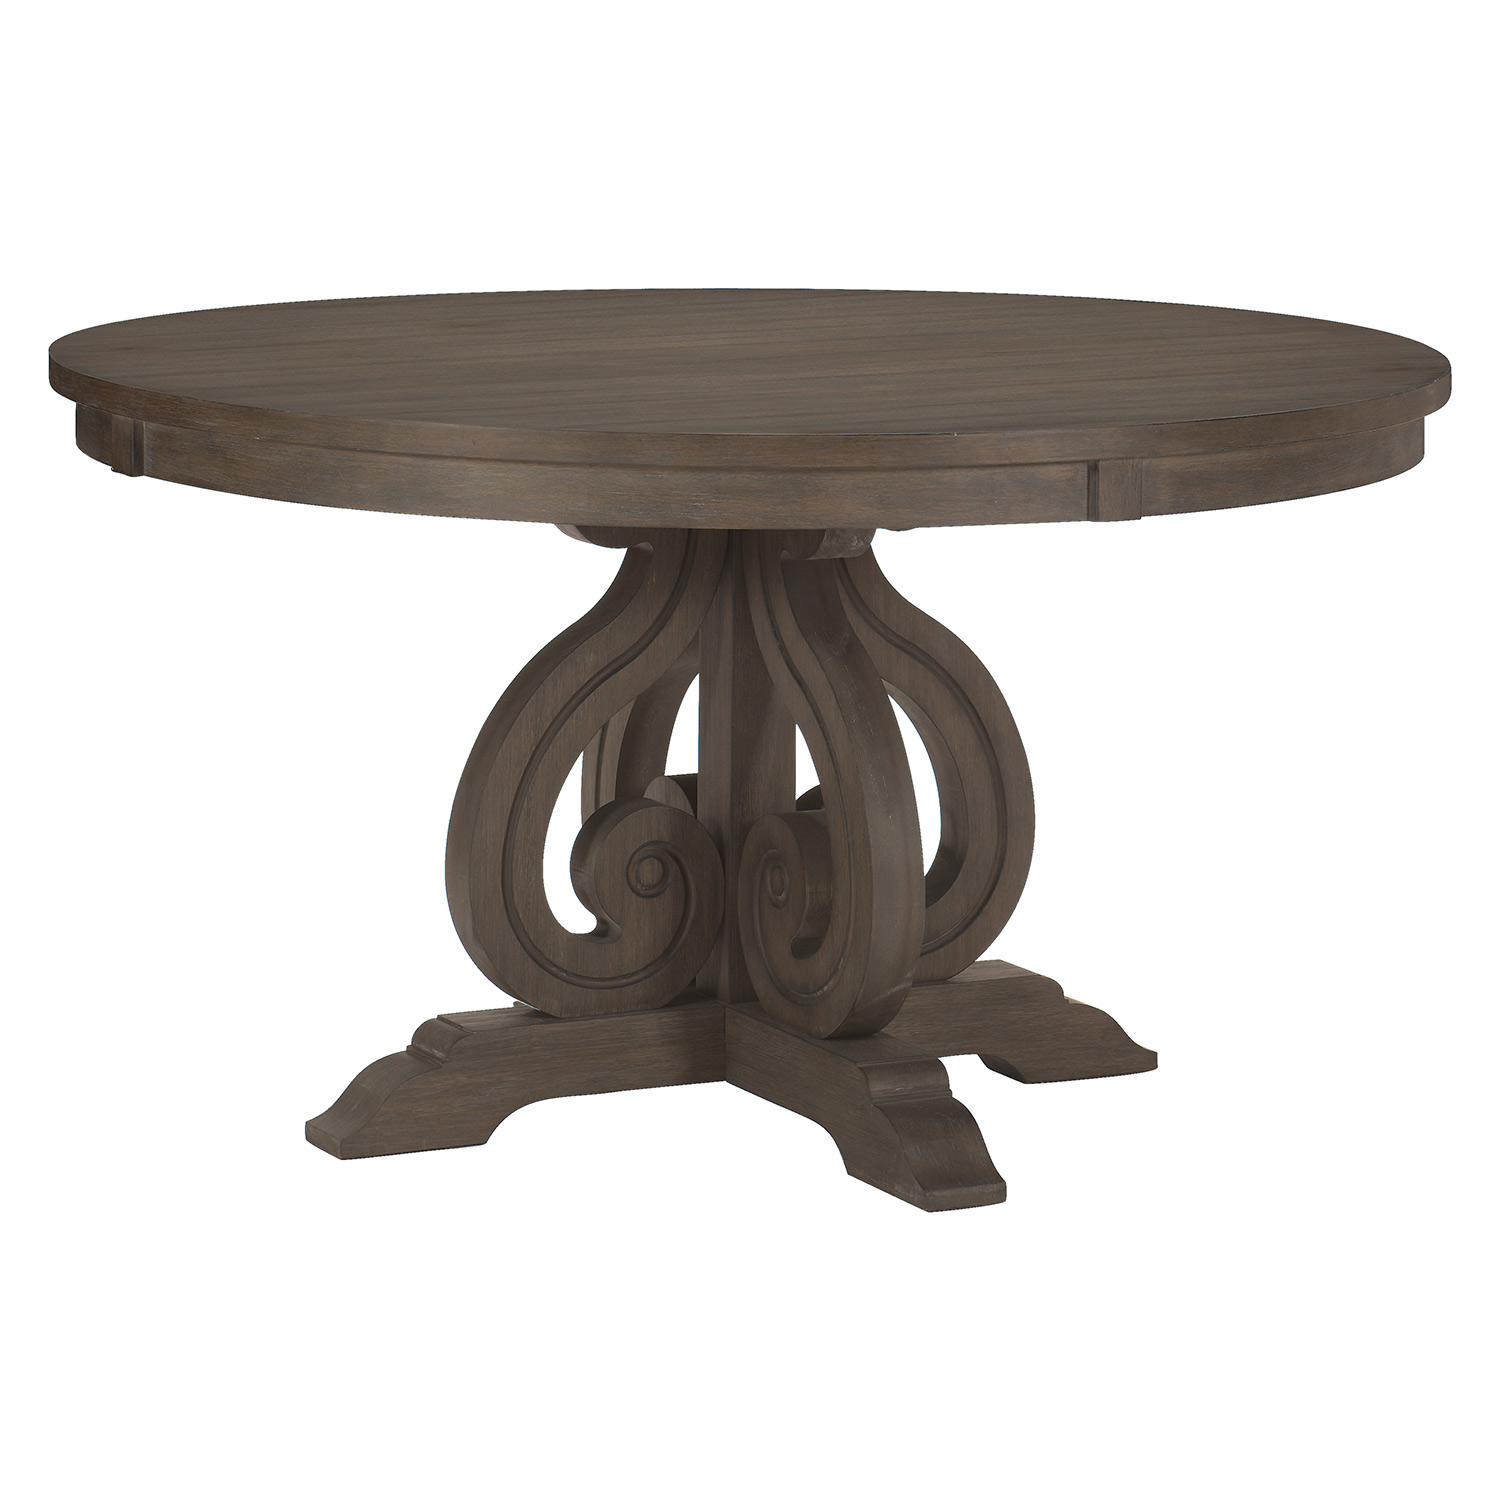 Homelegance Toulon Round DiningTable - Wire-brushed Dark Pewter